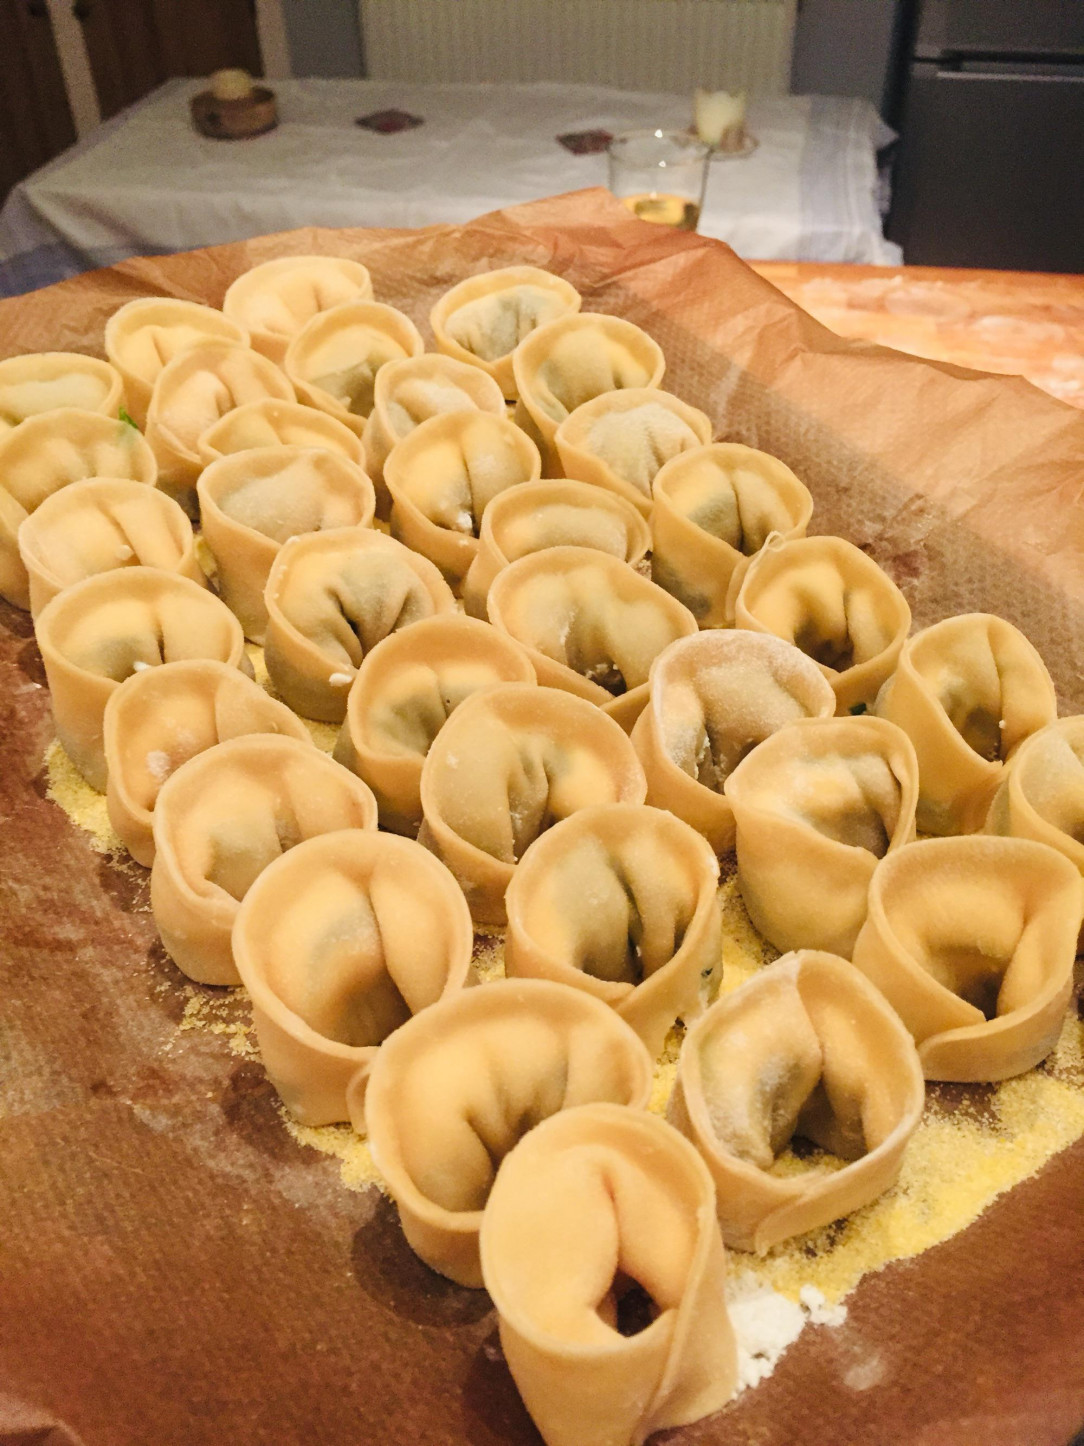 First time making tortellini. Keeping it simple with a classic spinach and ricotta filling